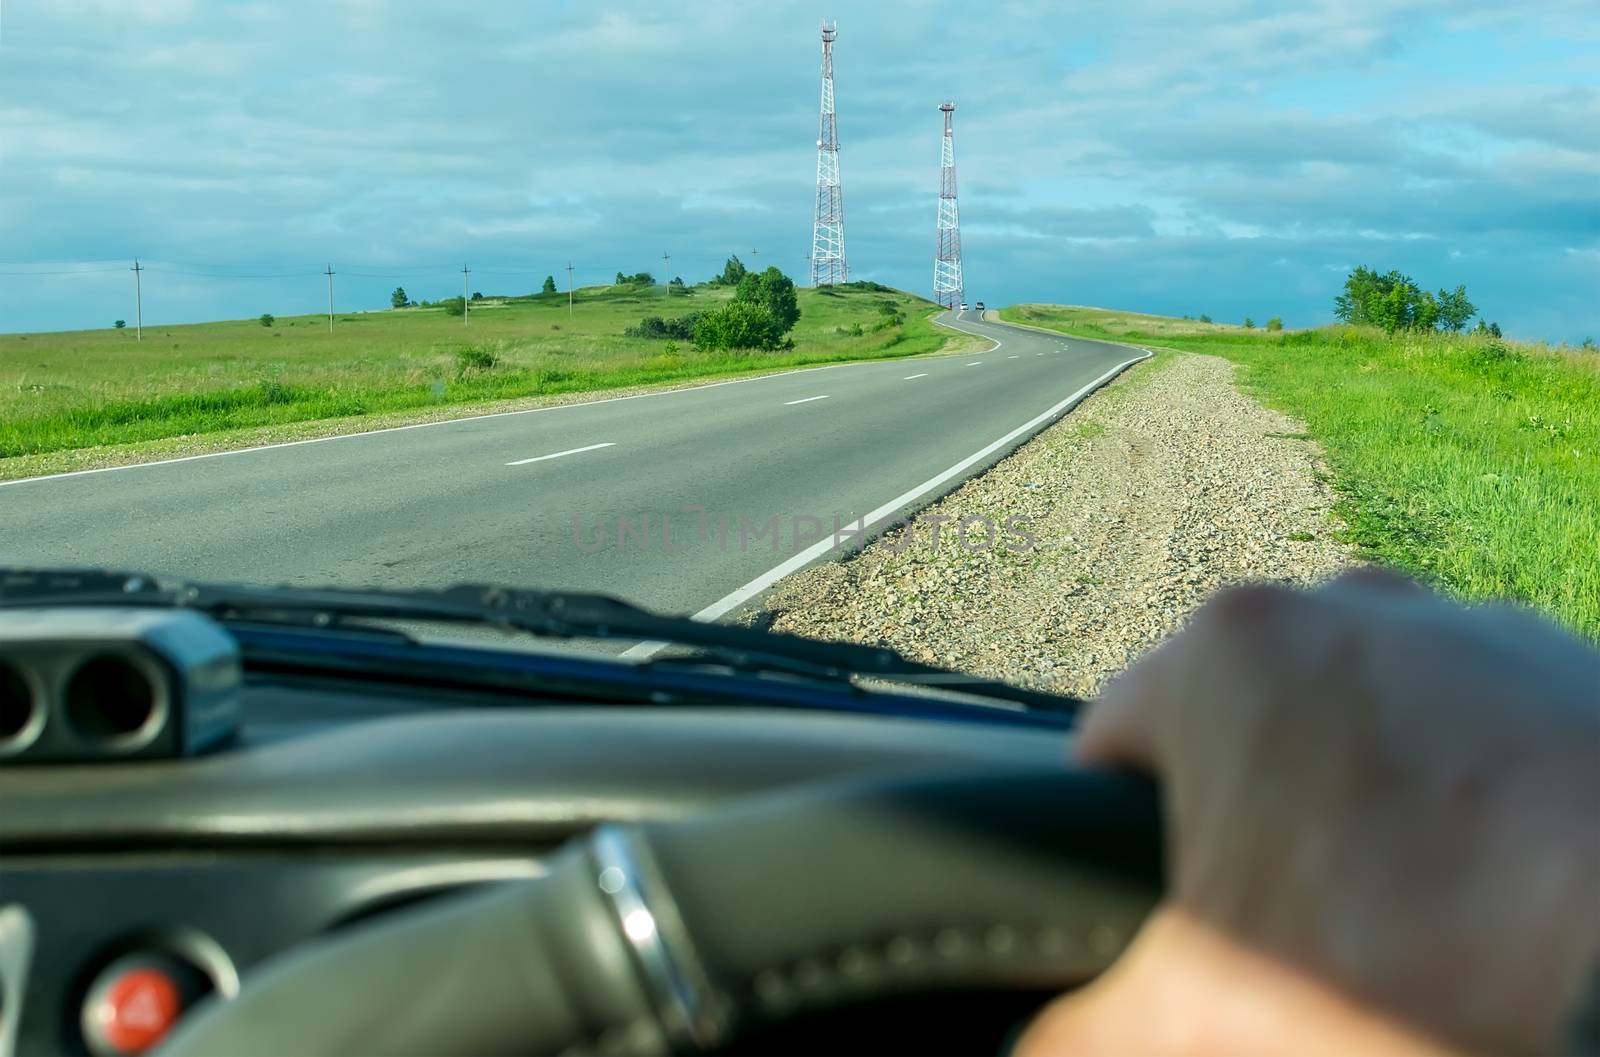 View from the driver's side of the car hands on the steering wheel on the background of the landscape and going up on the hill road with radio towers on the top